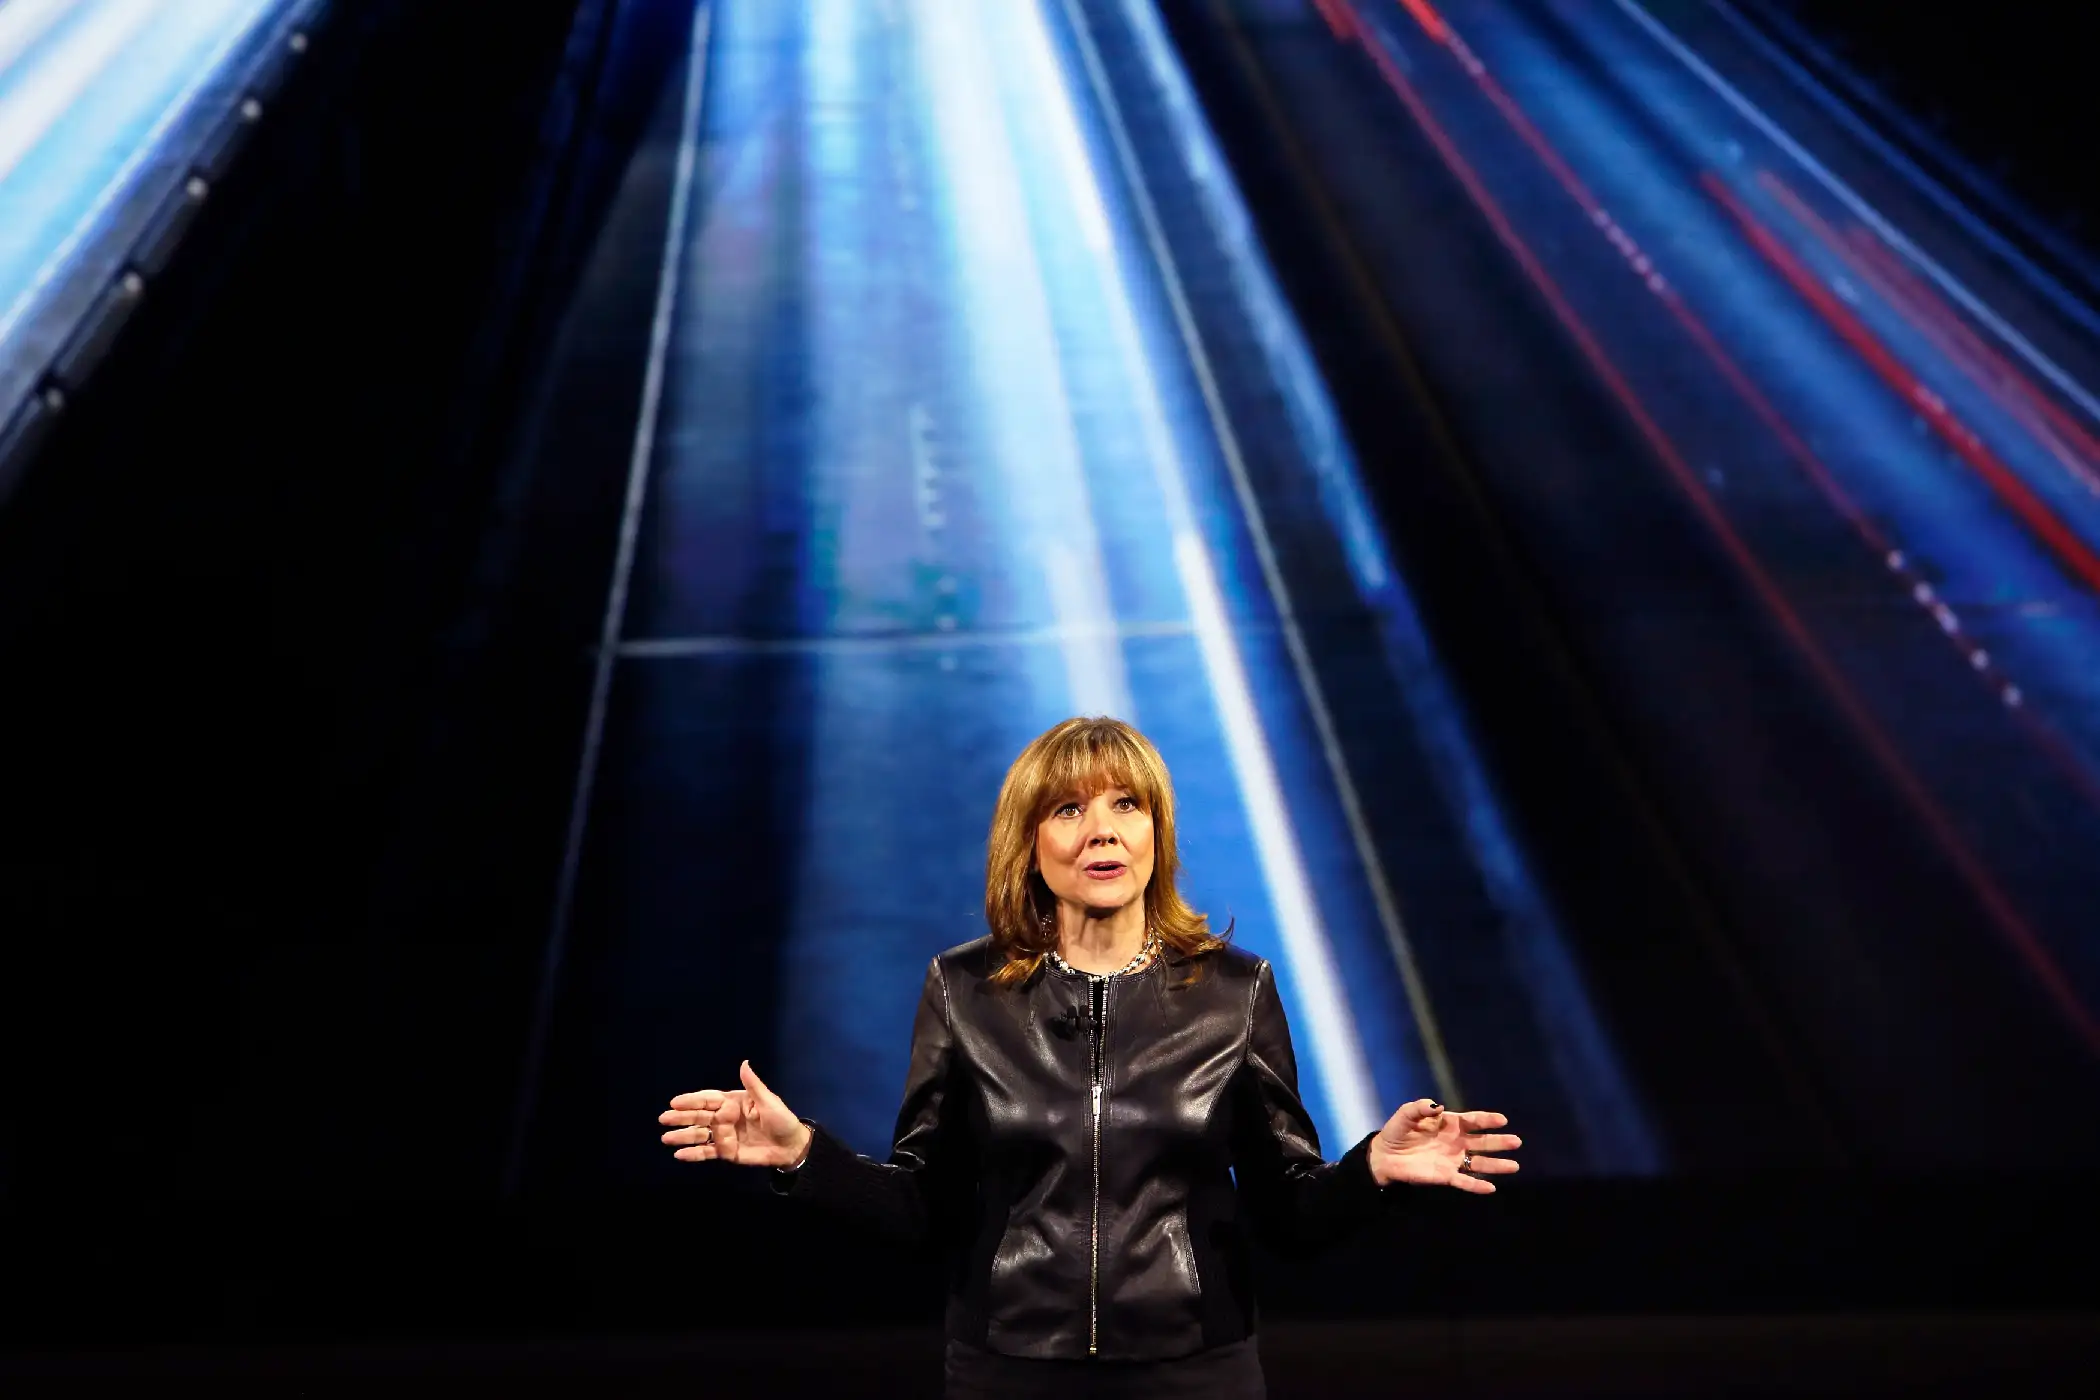 General Motors Chairman and CEO Mary Barra speaks during a keynote address at the 2016 CES trade show in Las Vegas, Nevada January 6, 2016.